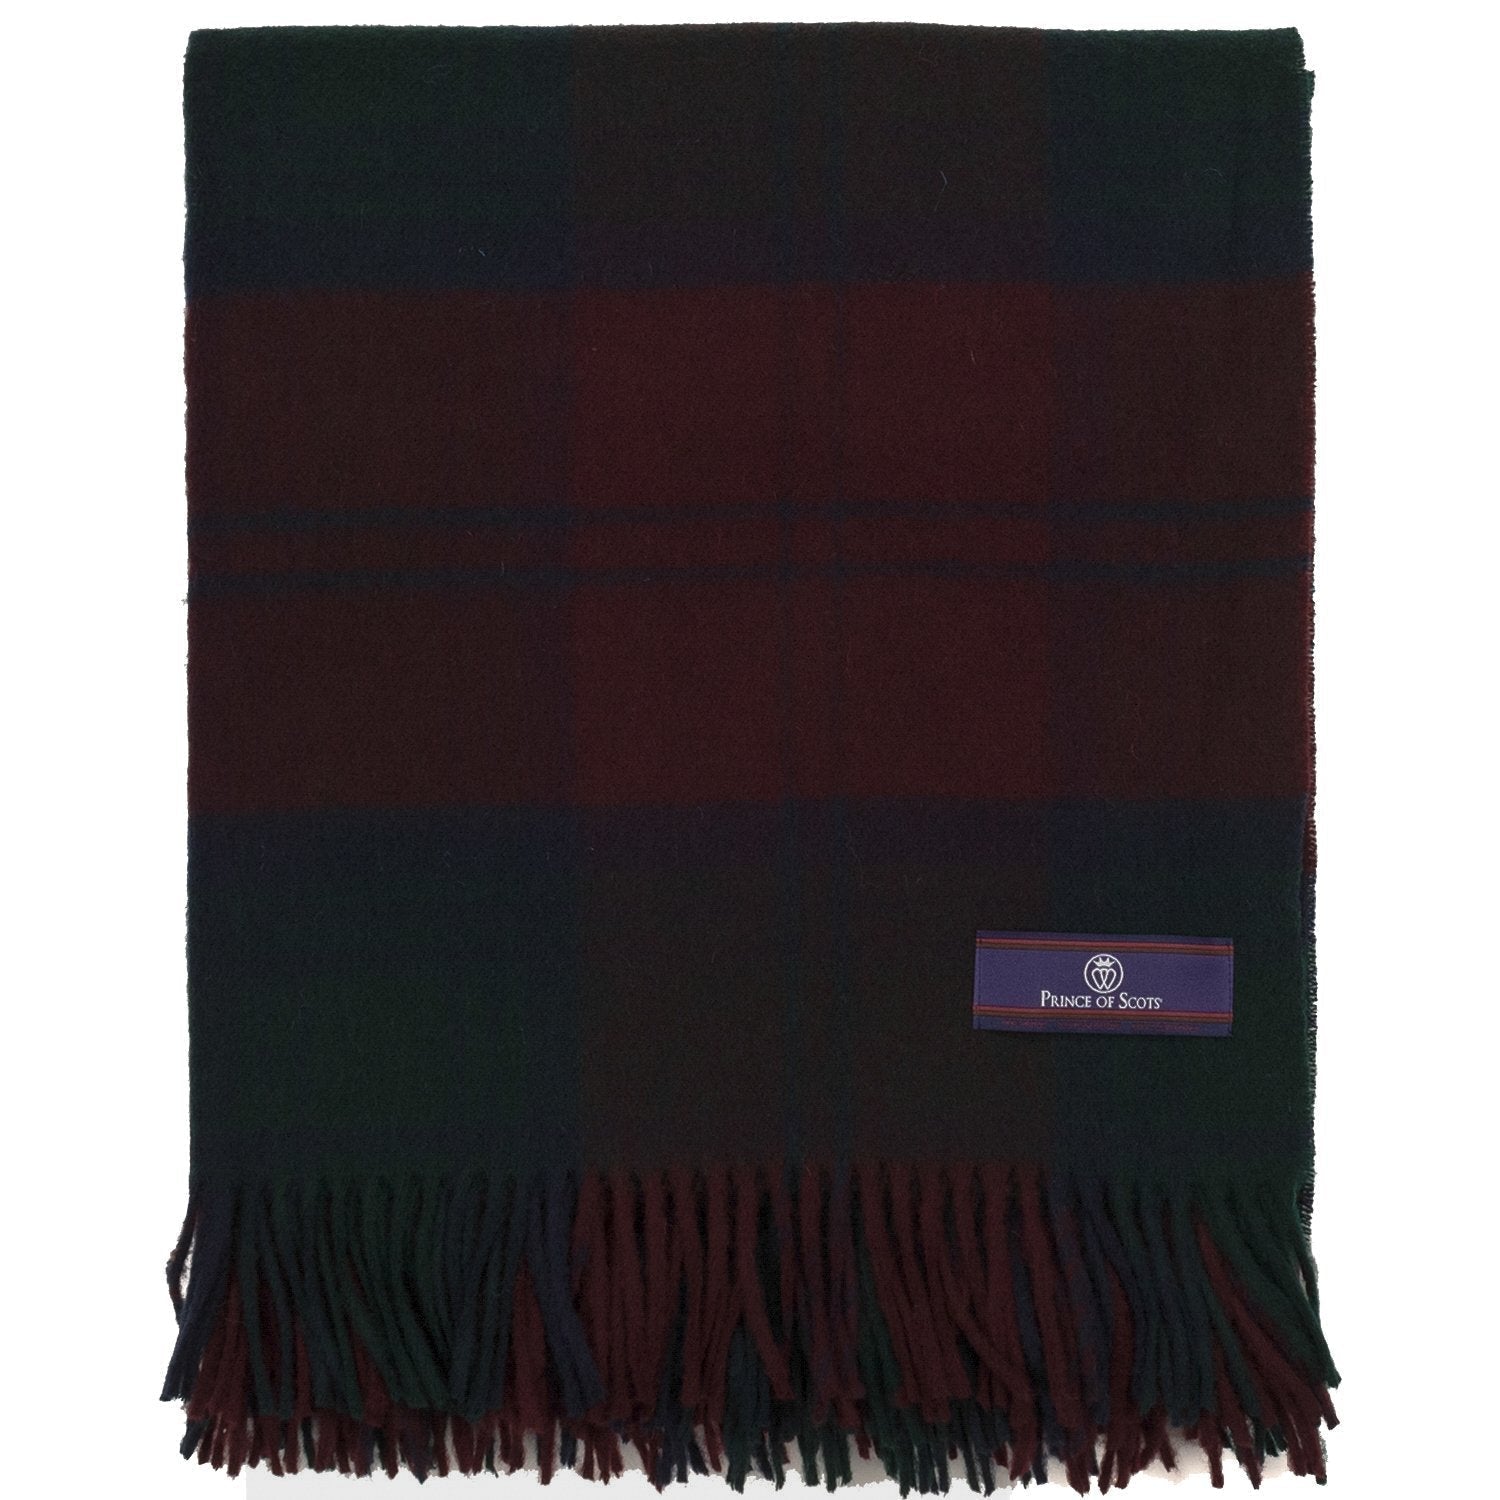 Prince of Scots Highland Tweed Merino Wool Throw ~ Lindsay ~-Throws and Blankets-Prince of Scots-00810032750497-J400017-Prince of Scots